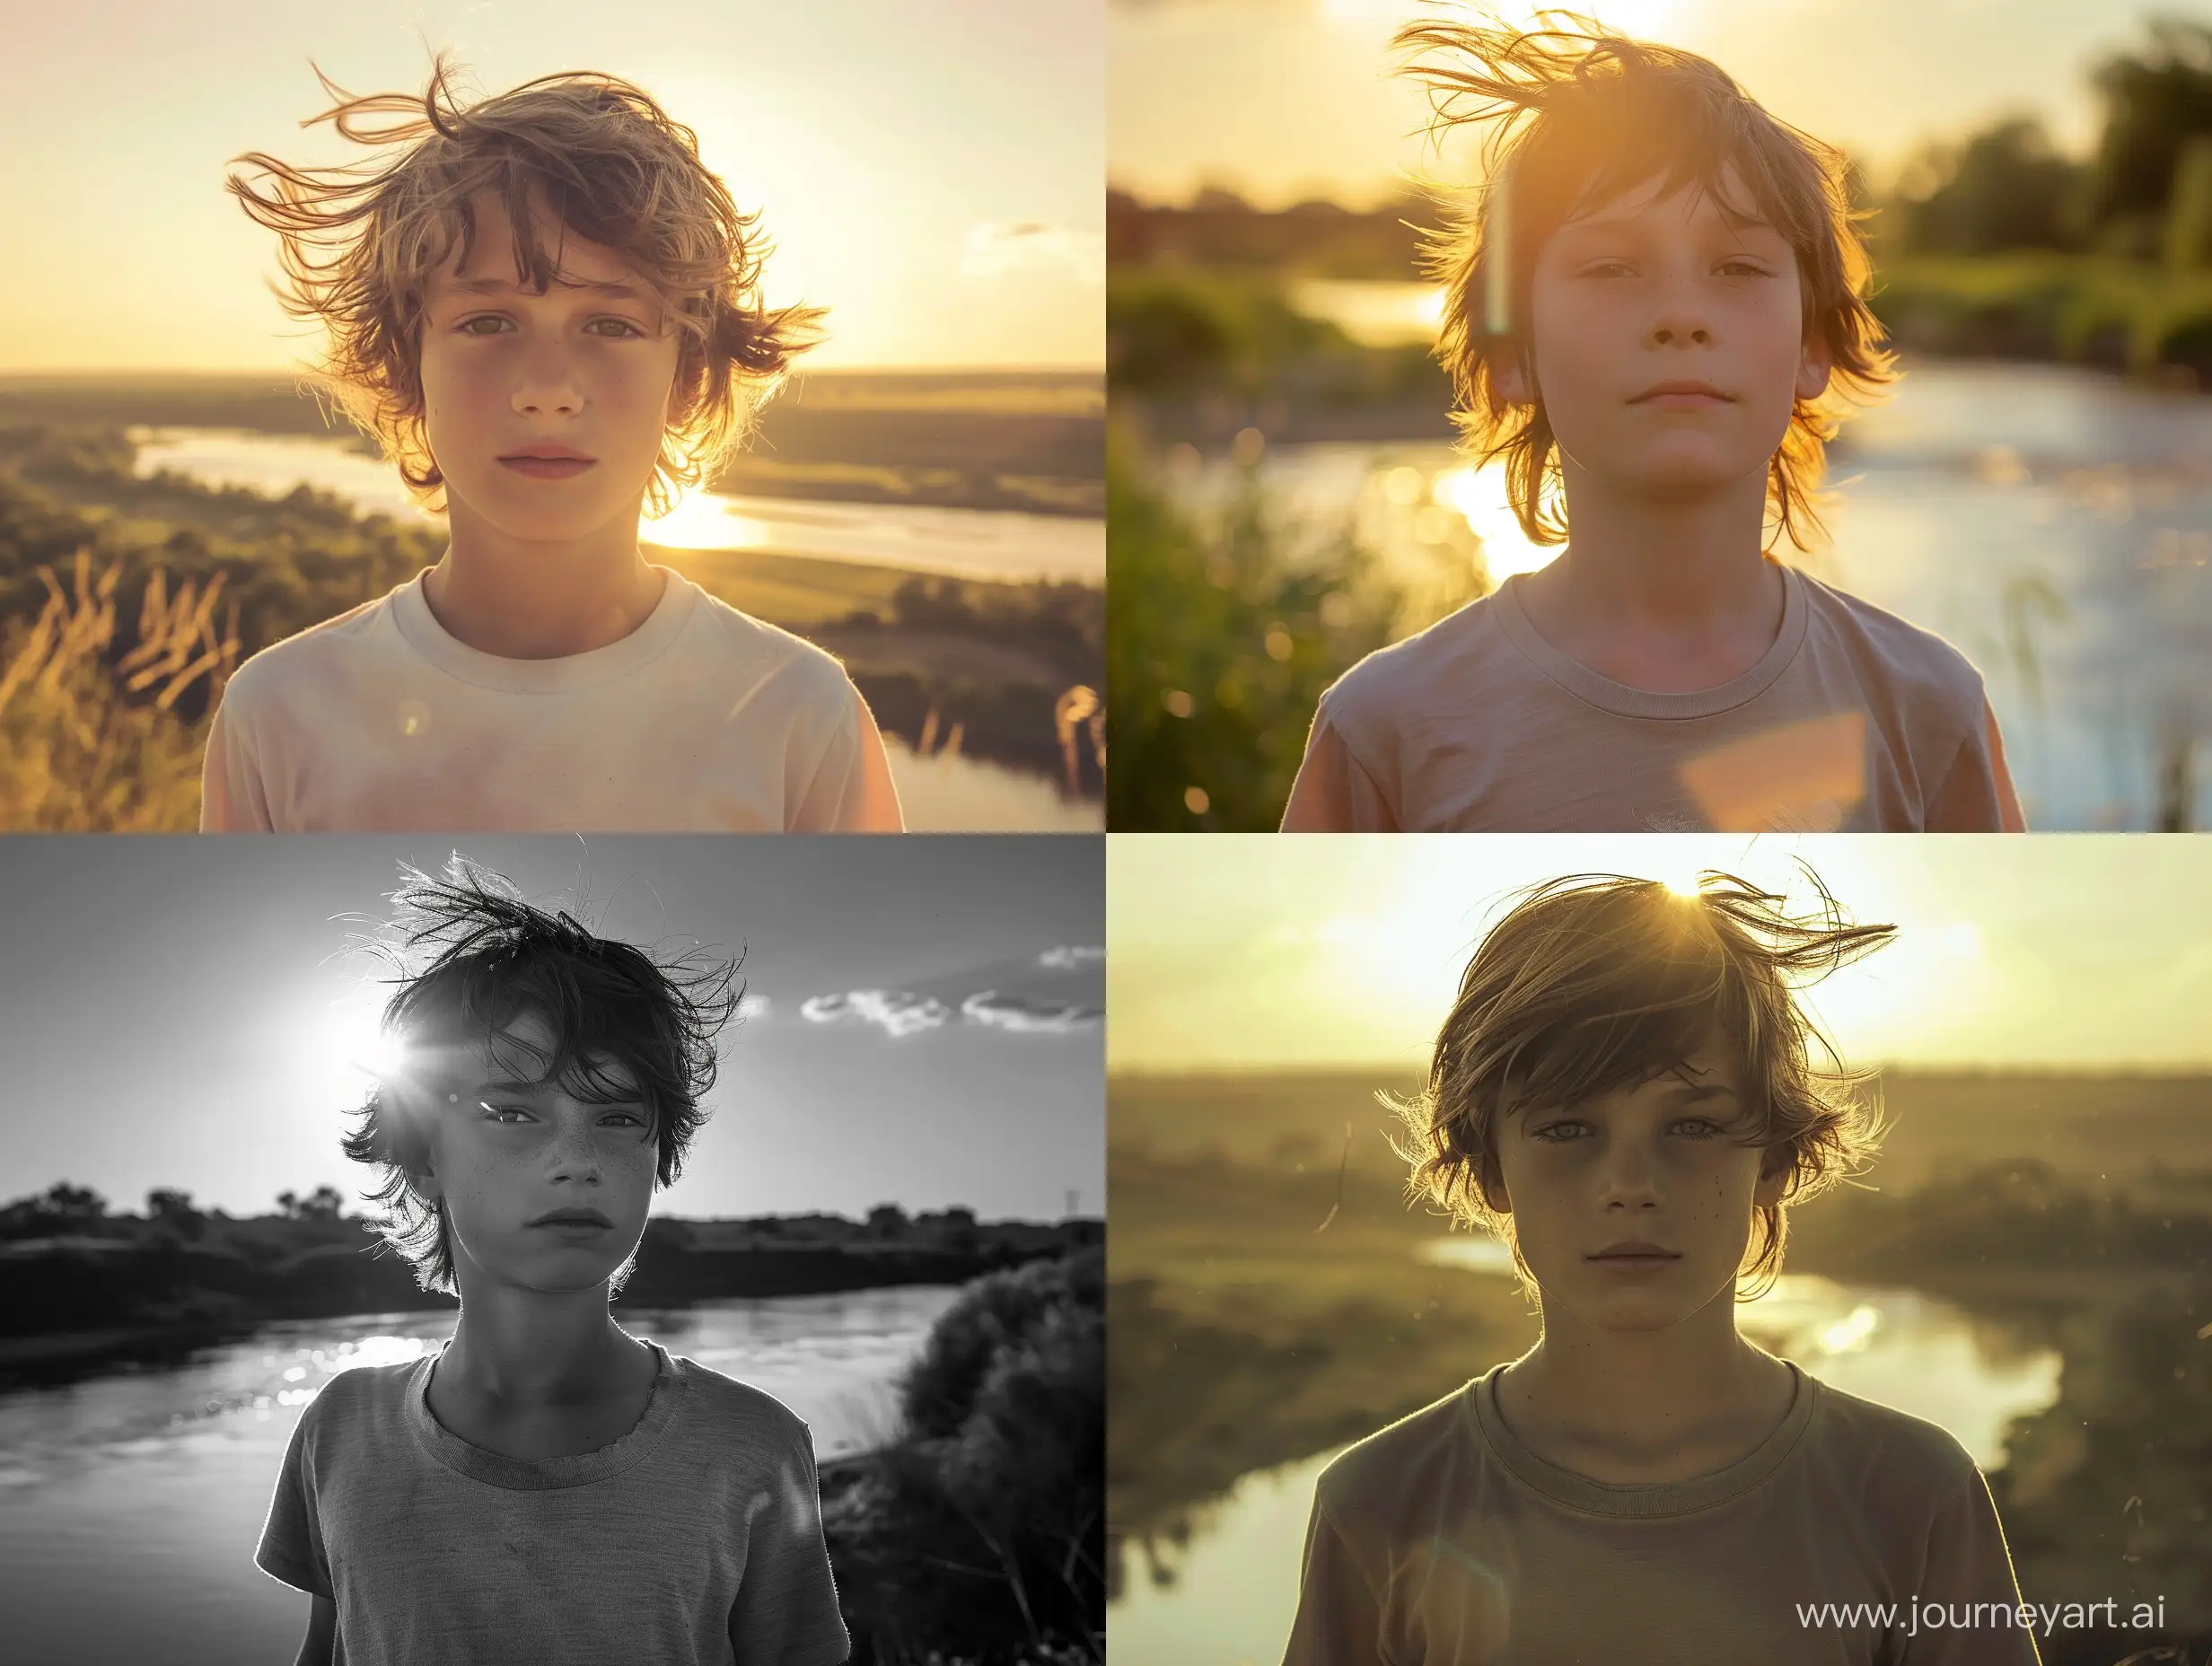 Portrait-of-a-12YearOld-Boy-by-the-River-Under-Sunlight